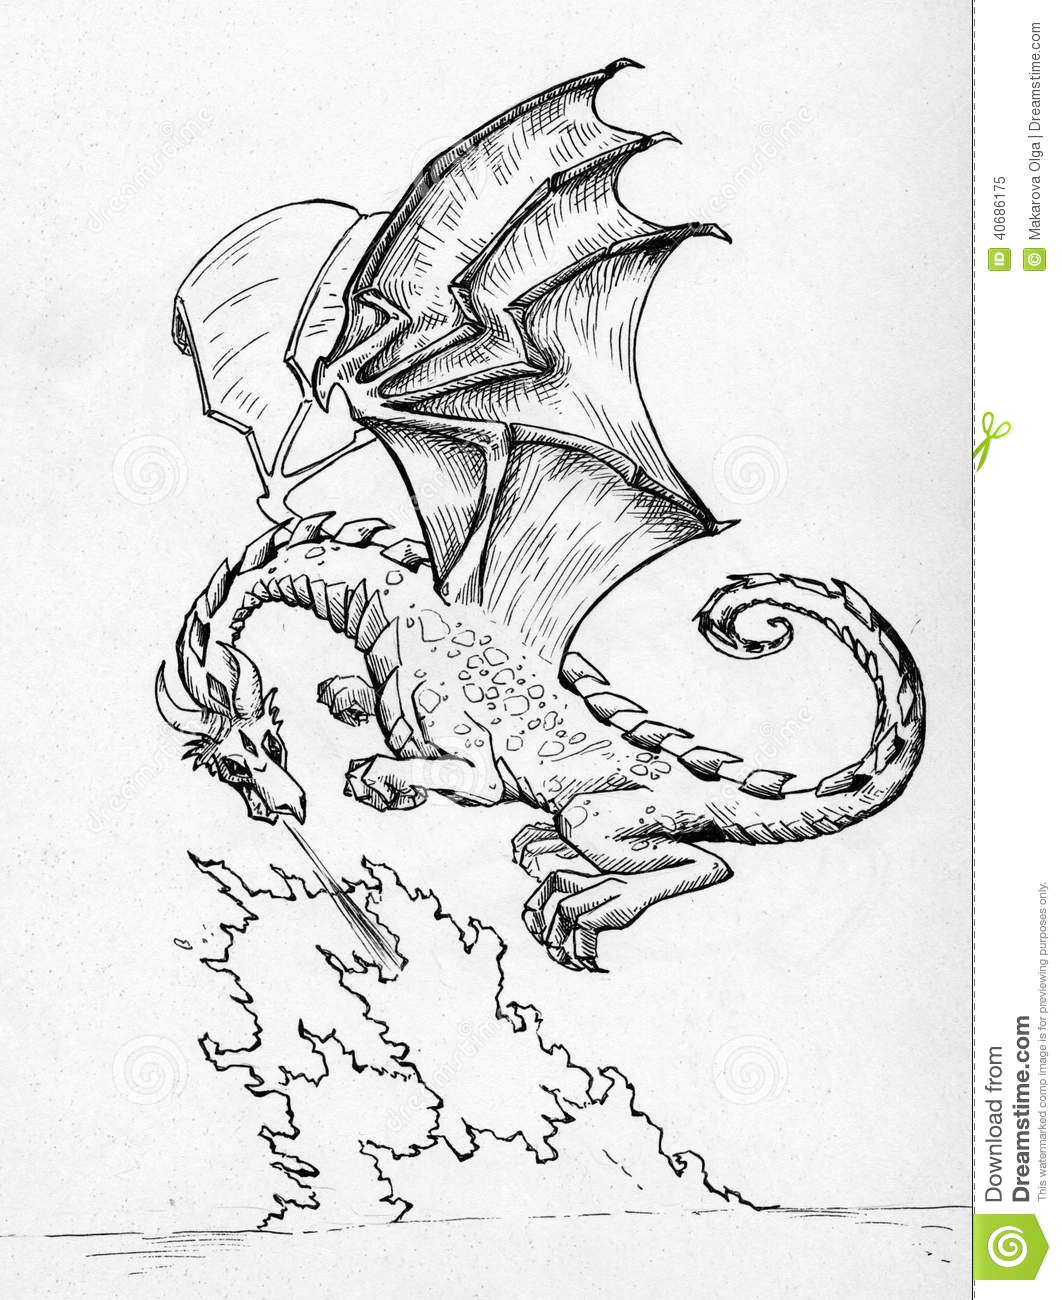 Drawings Of Dragons Blowing Fire Dragon Breathing Fire Stock Illustration Illustration Of